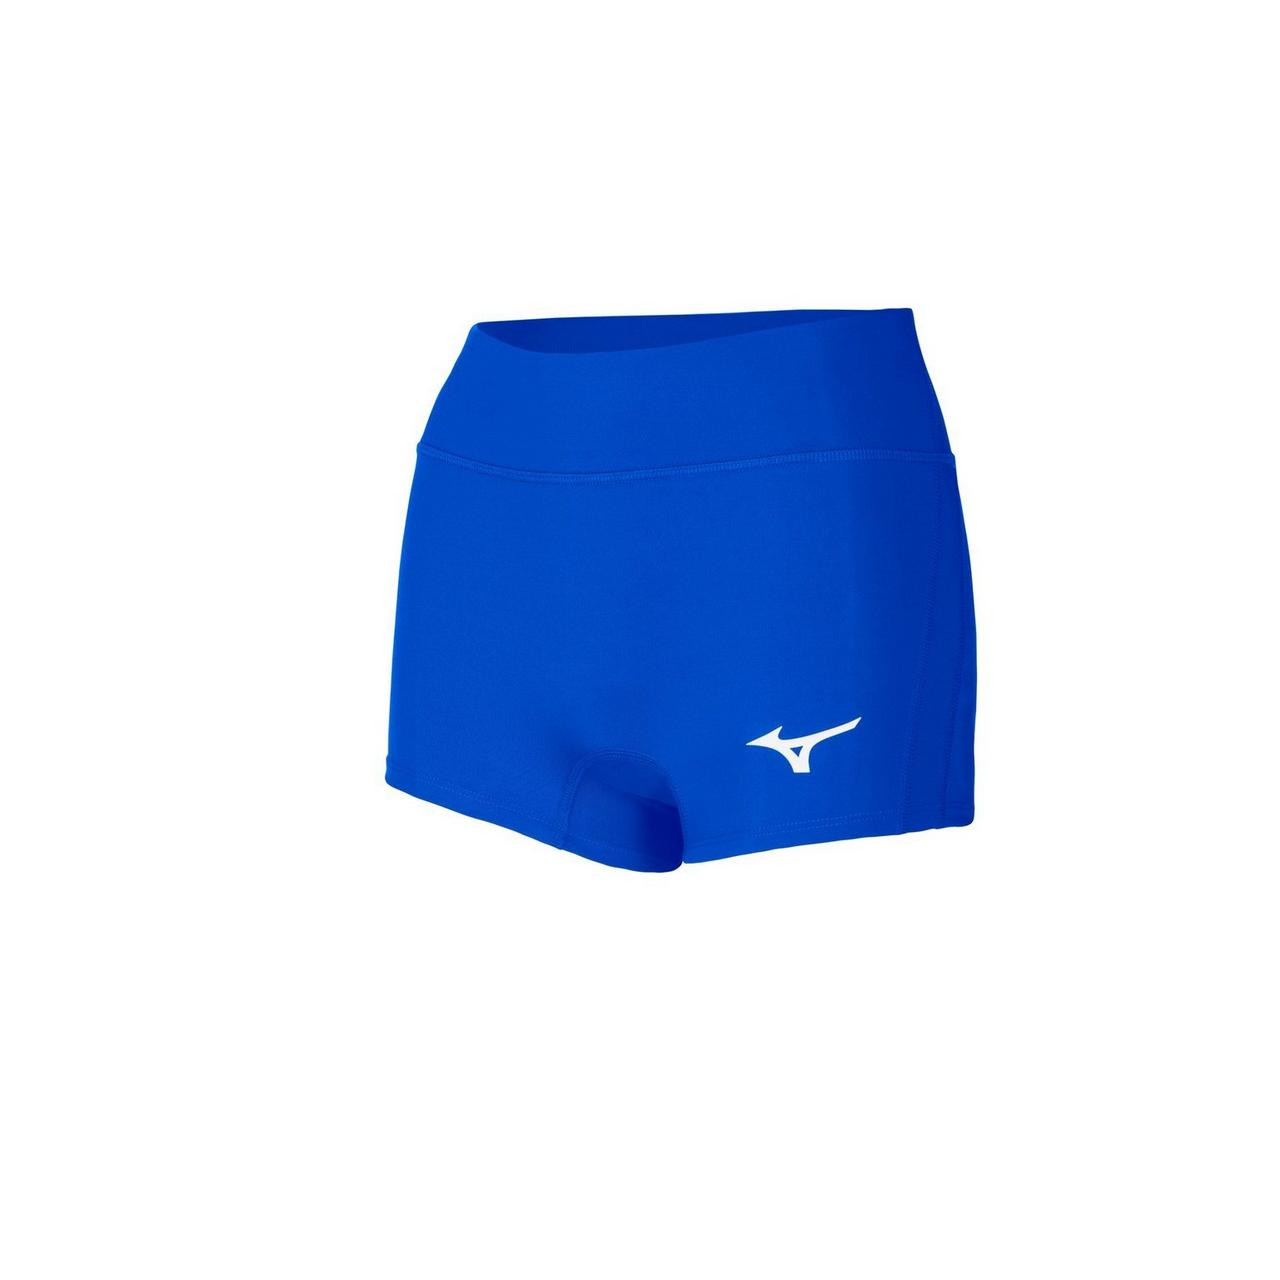 Mizuno Low Rider Volleyball Spandex Shorts in Several Team Color Choices -  Spandex Shorts in 2.5 inseam - Lots of Colors & Styles